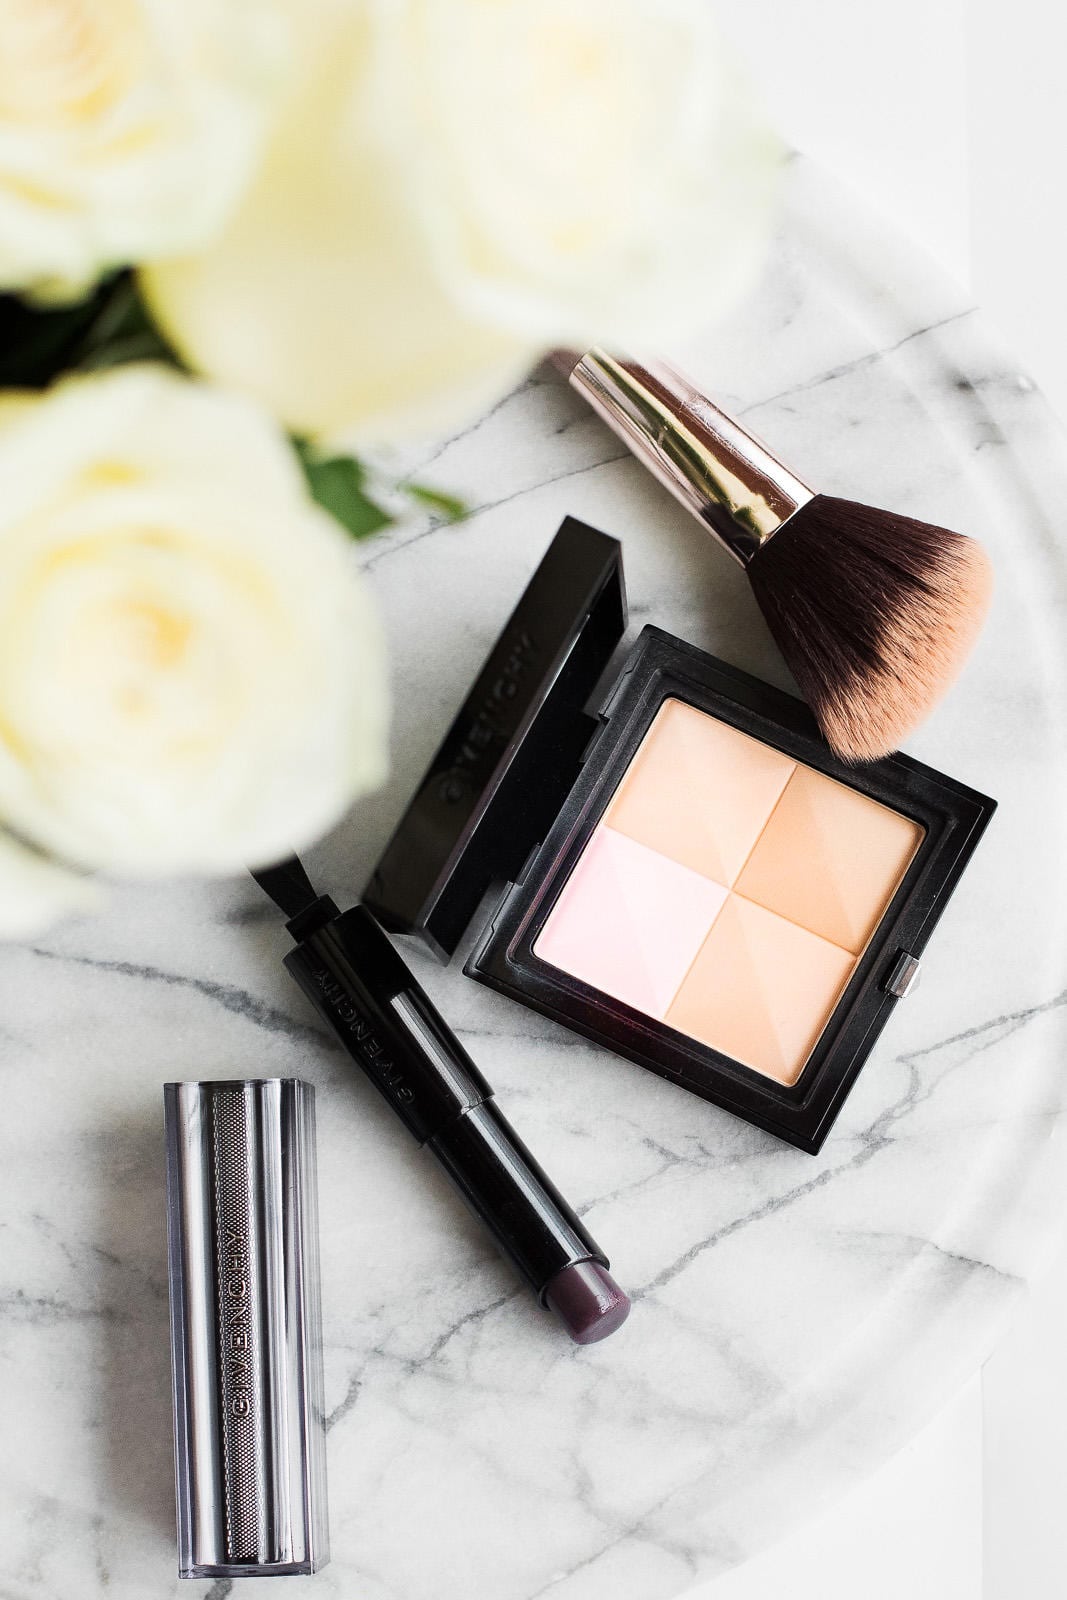 The Perfect Face Powder and Lip Color for your Complexion | The Girl From Panama